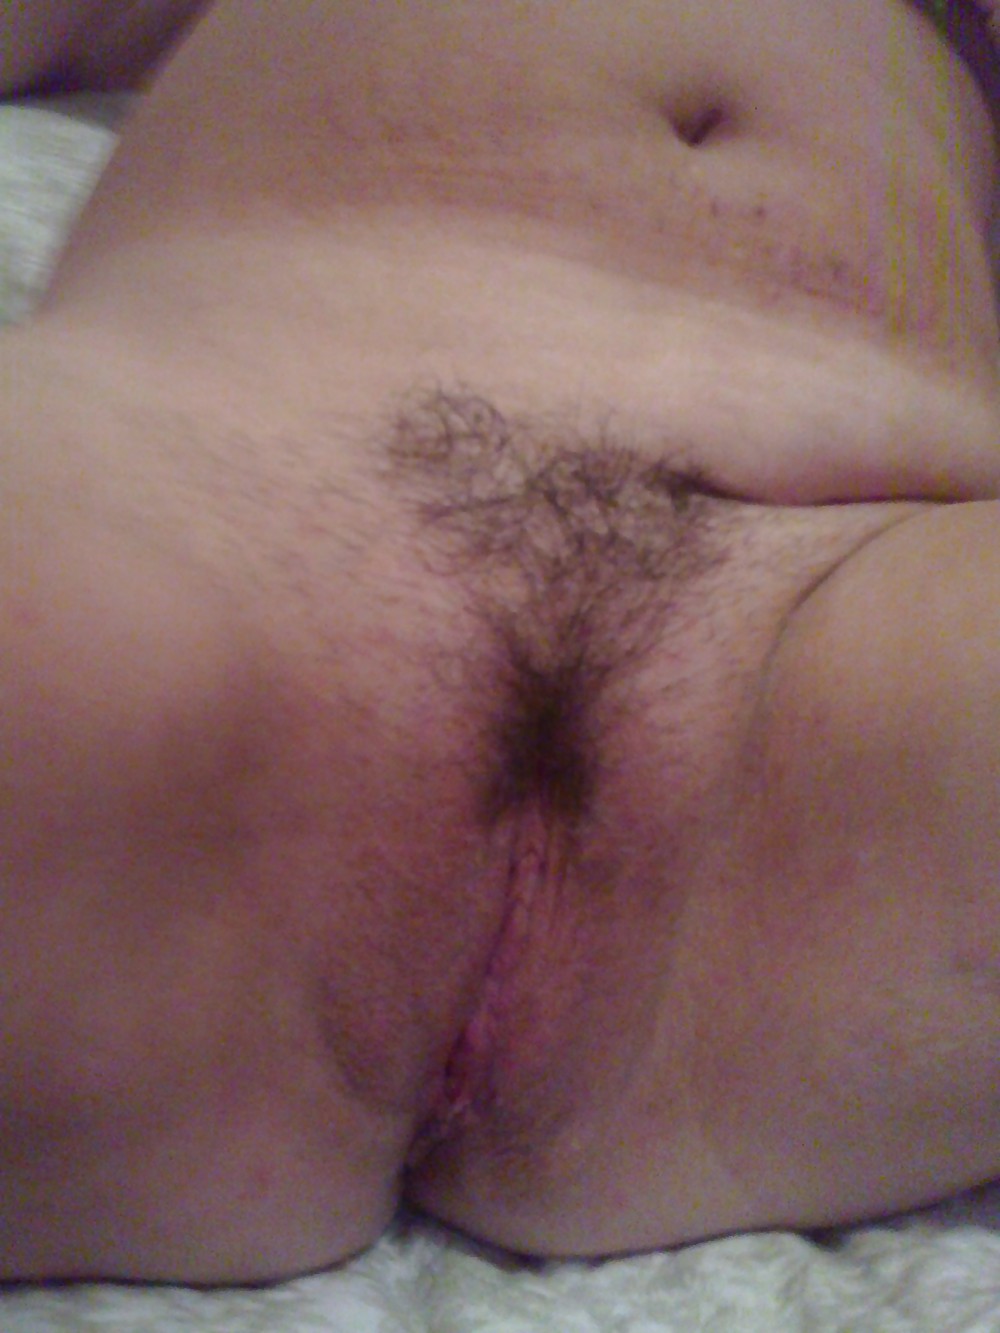 Sex mature woman i have met and fucked this week image